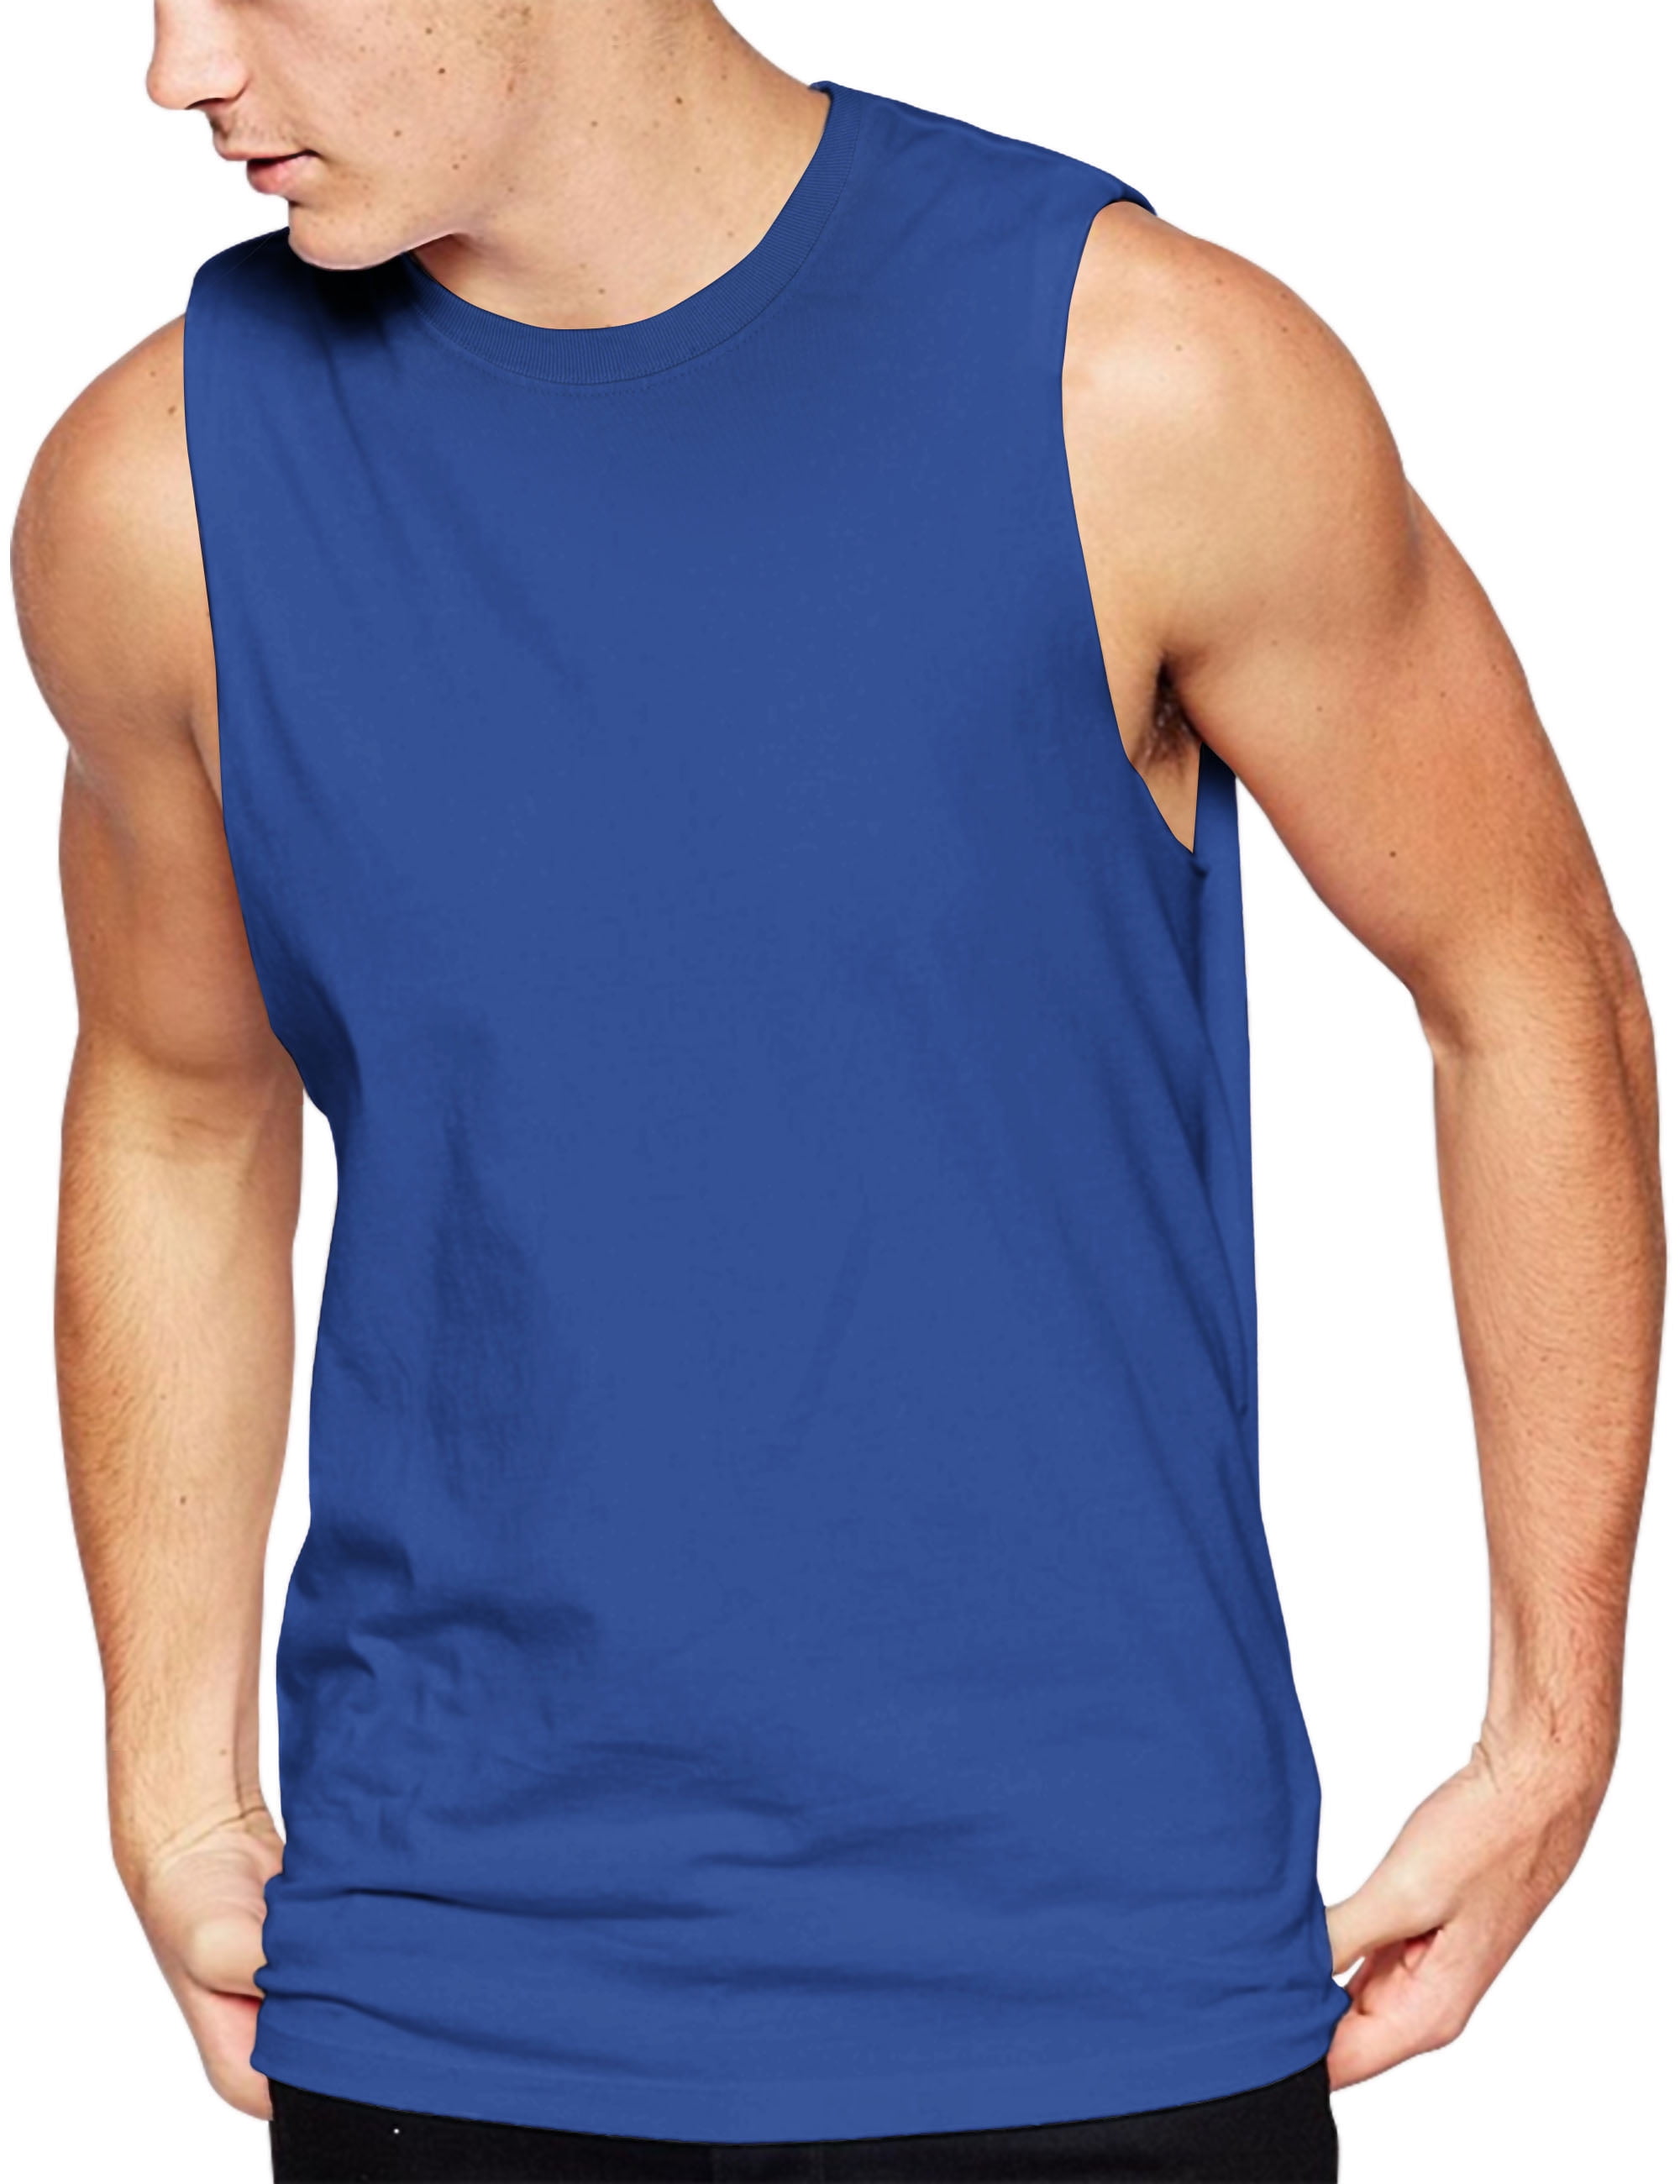 Hat and Beyond Mens Tank Top Muscle Fit Active Exercise Sleeveless Shirt 